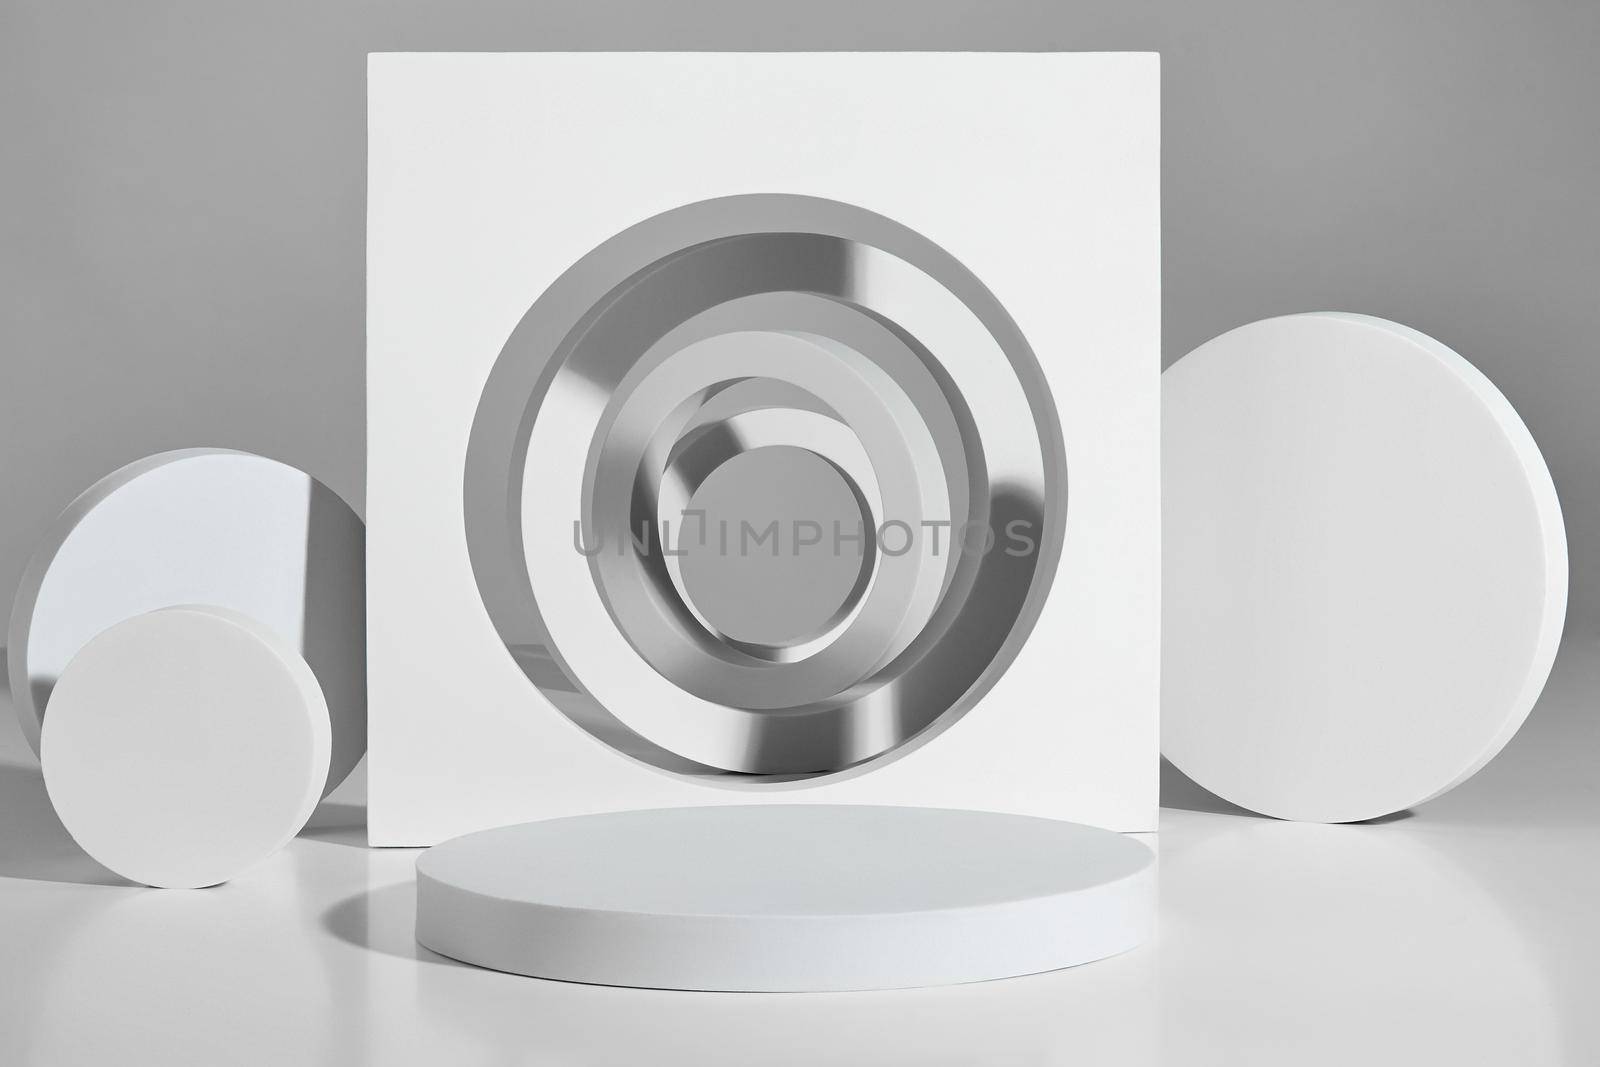 Abstract podium design for product display consisting of empty platform, vertically arranged flat cylinders and rings and round cut square element. White geometrical shapes on gray background